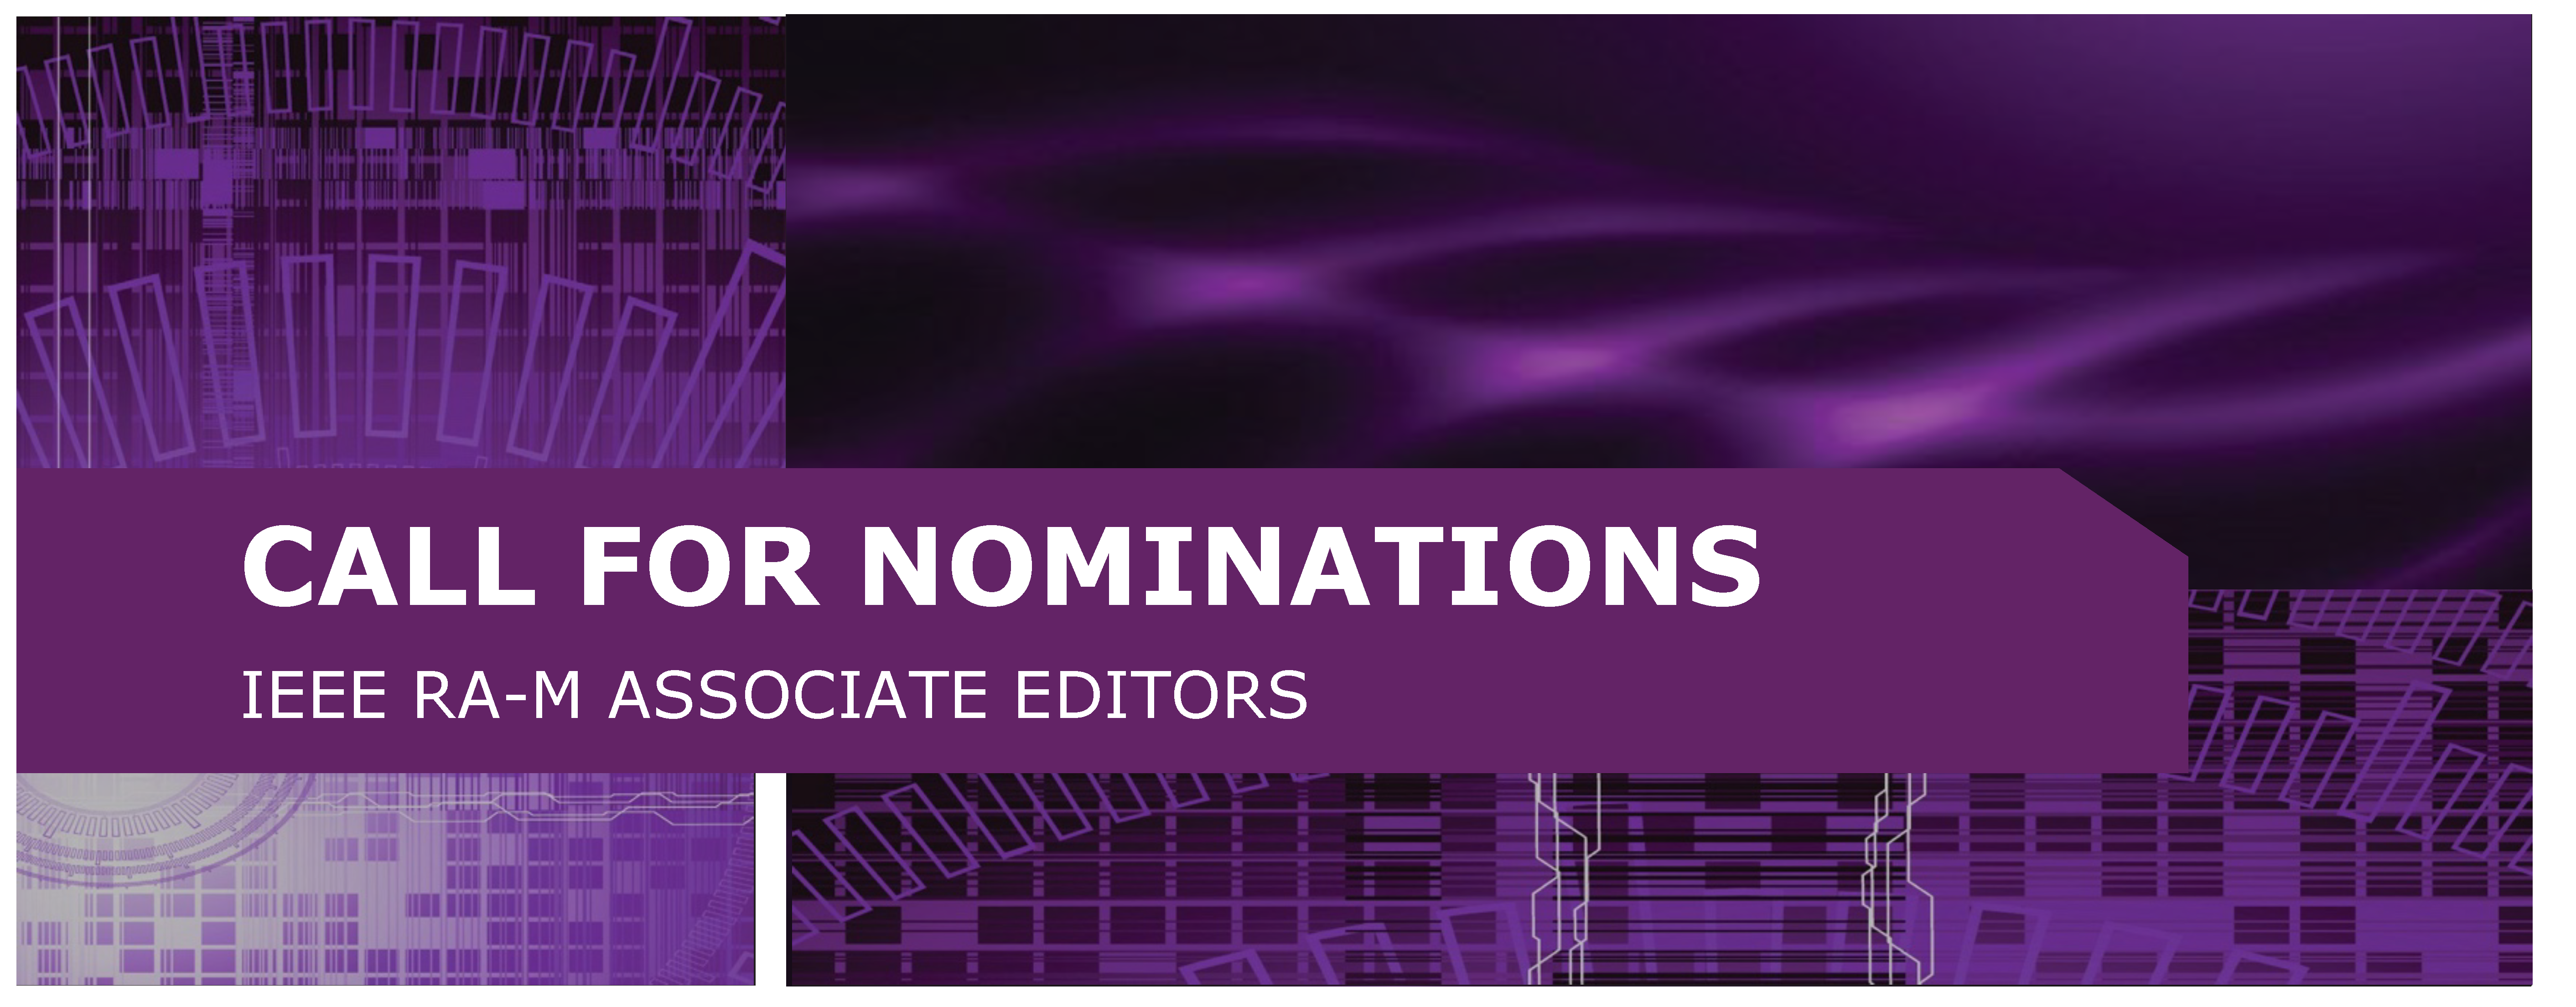 call for nominations banner